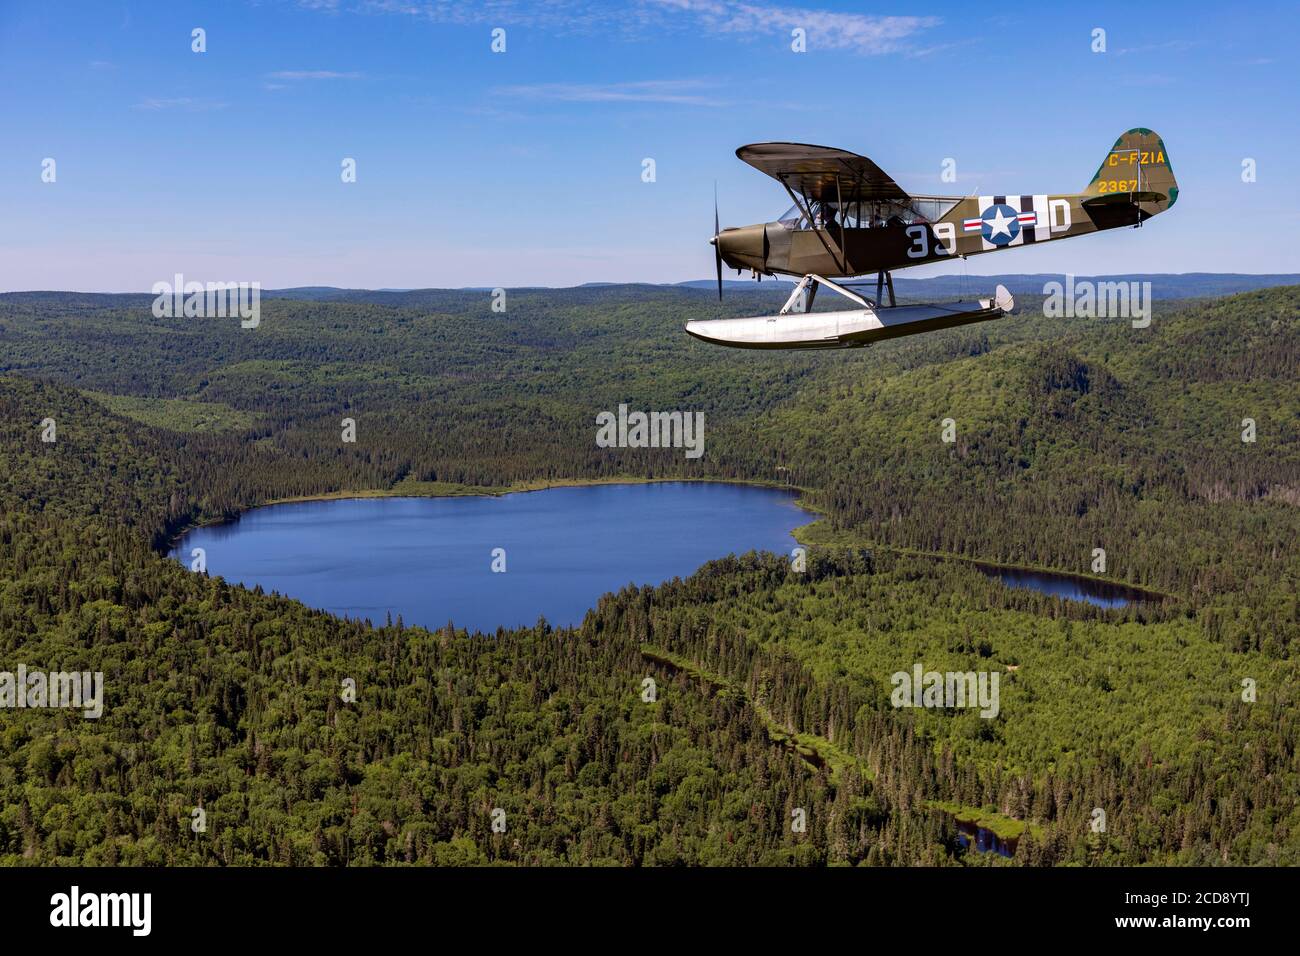 Canada, Province of Quebec, Mauricie Region, Hydravion Aventure, Saint-Maurice Wildlife Reserve north of Mauricie National Park, Piper Seaplane Flight Stock Photo